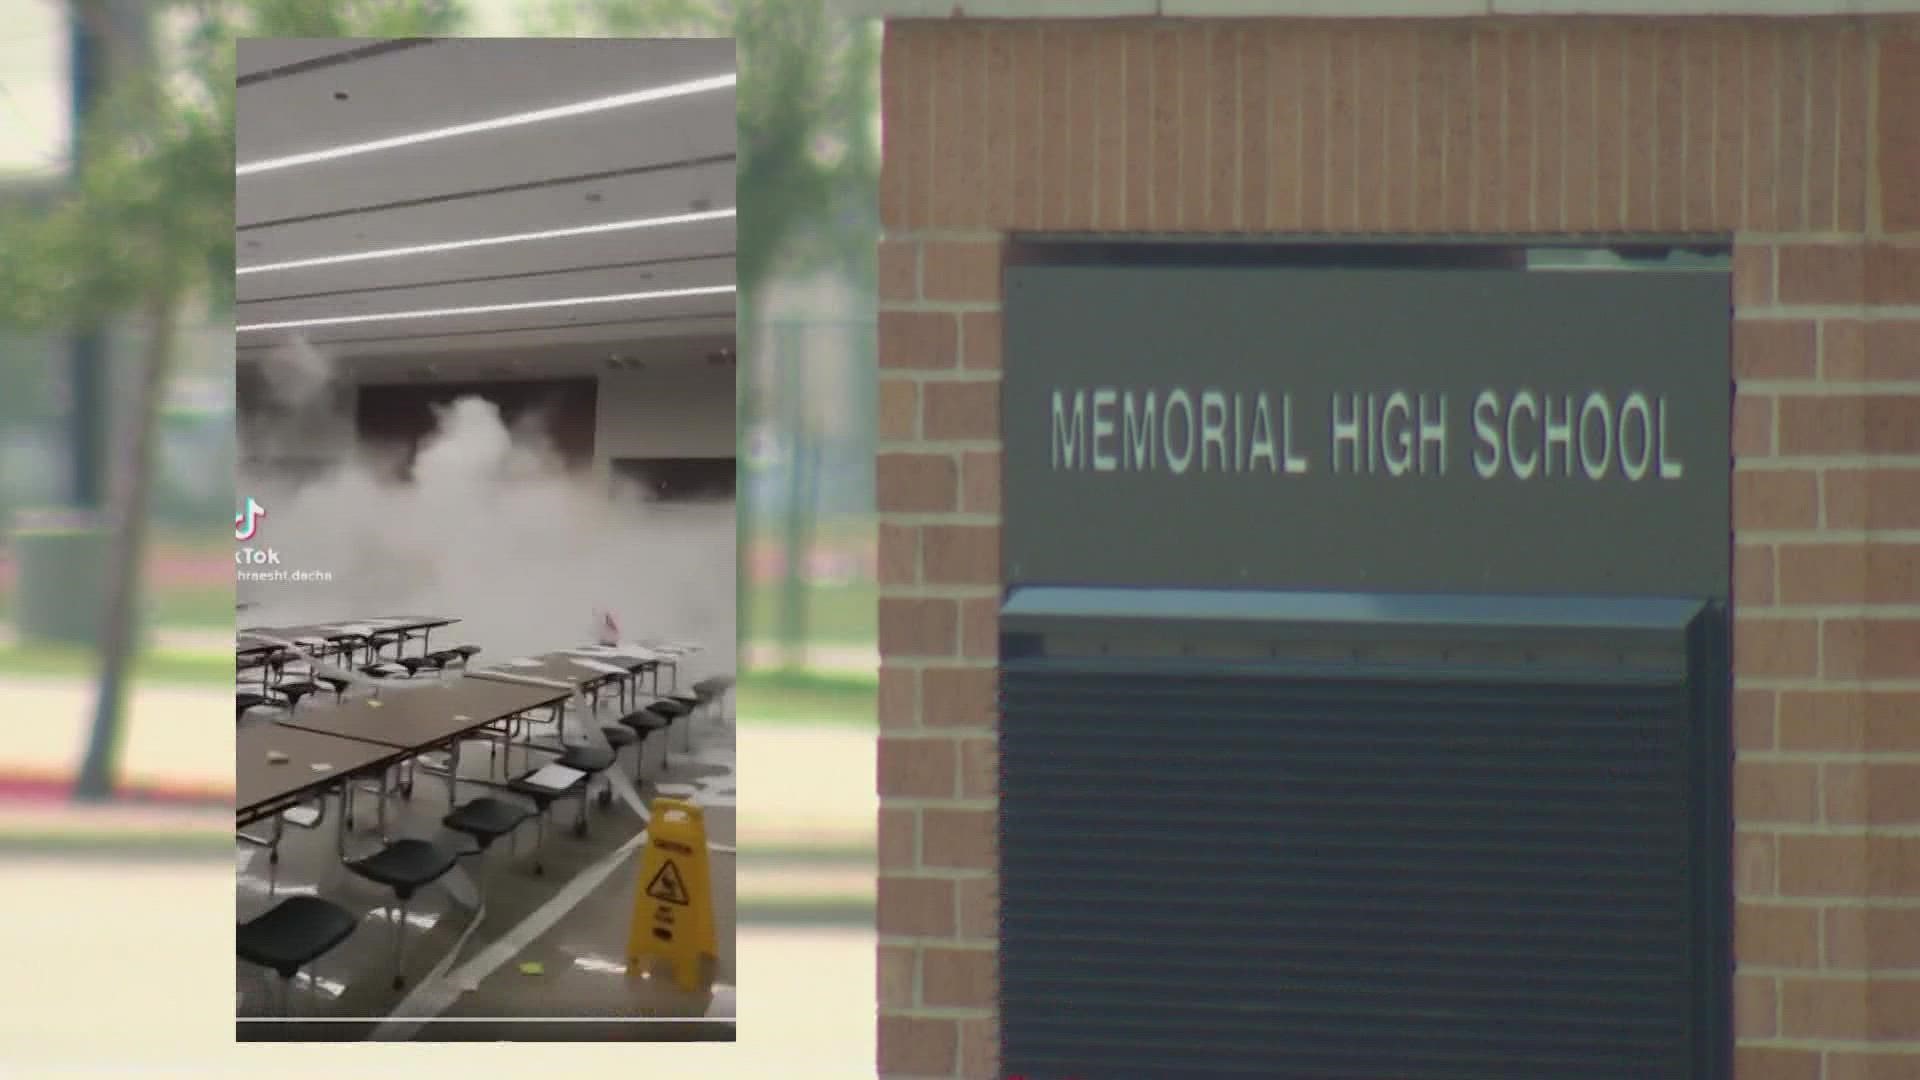 Classes were cancelled at a Frisco ISD high school after students vandalized the school, according to district officials.